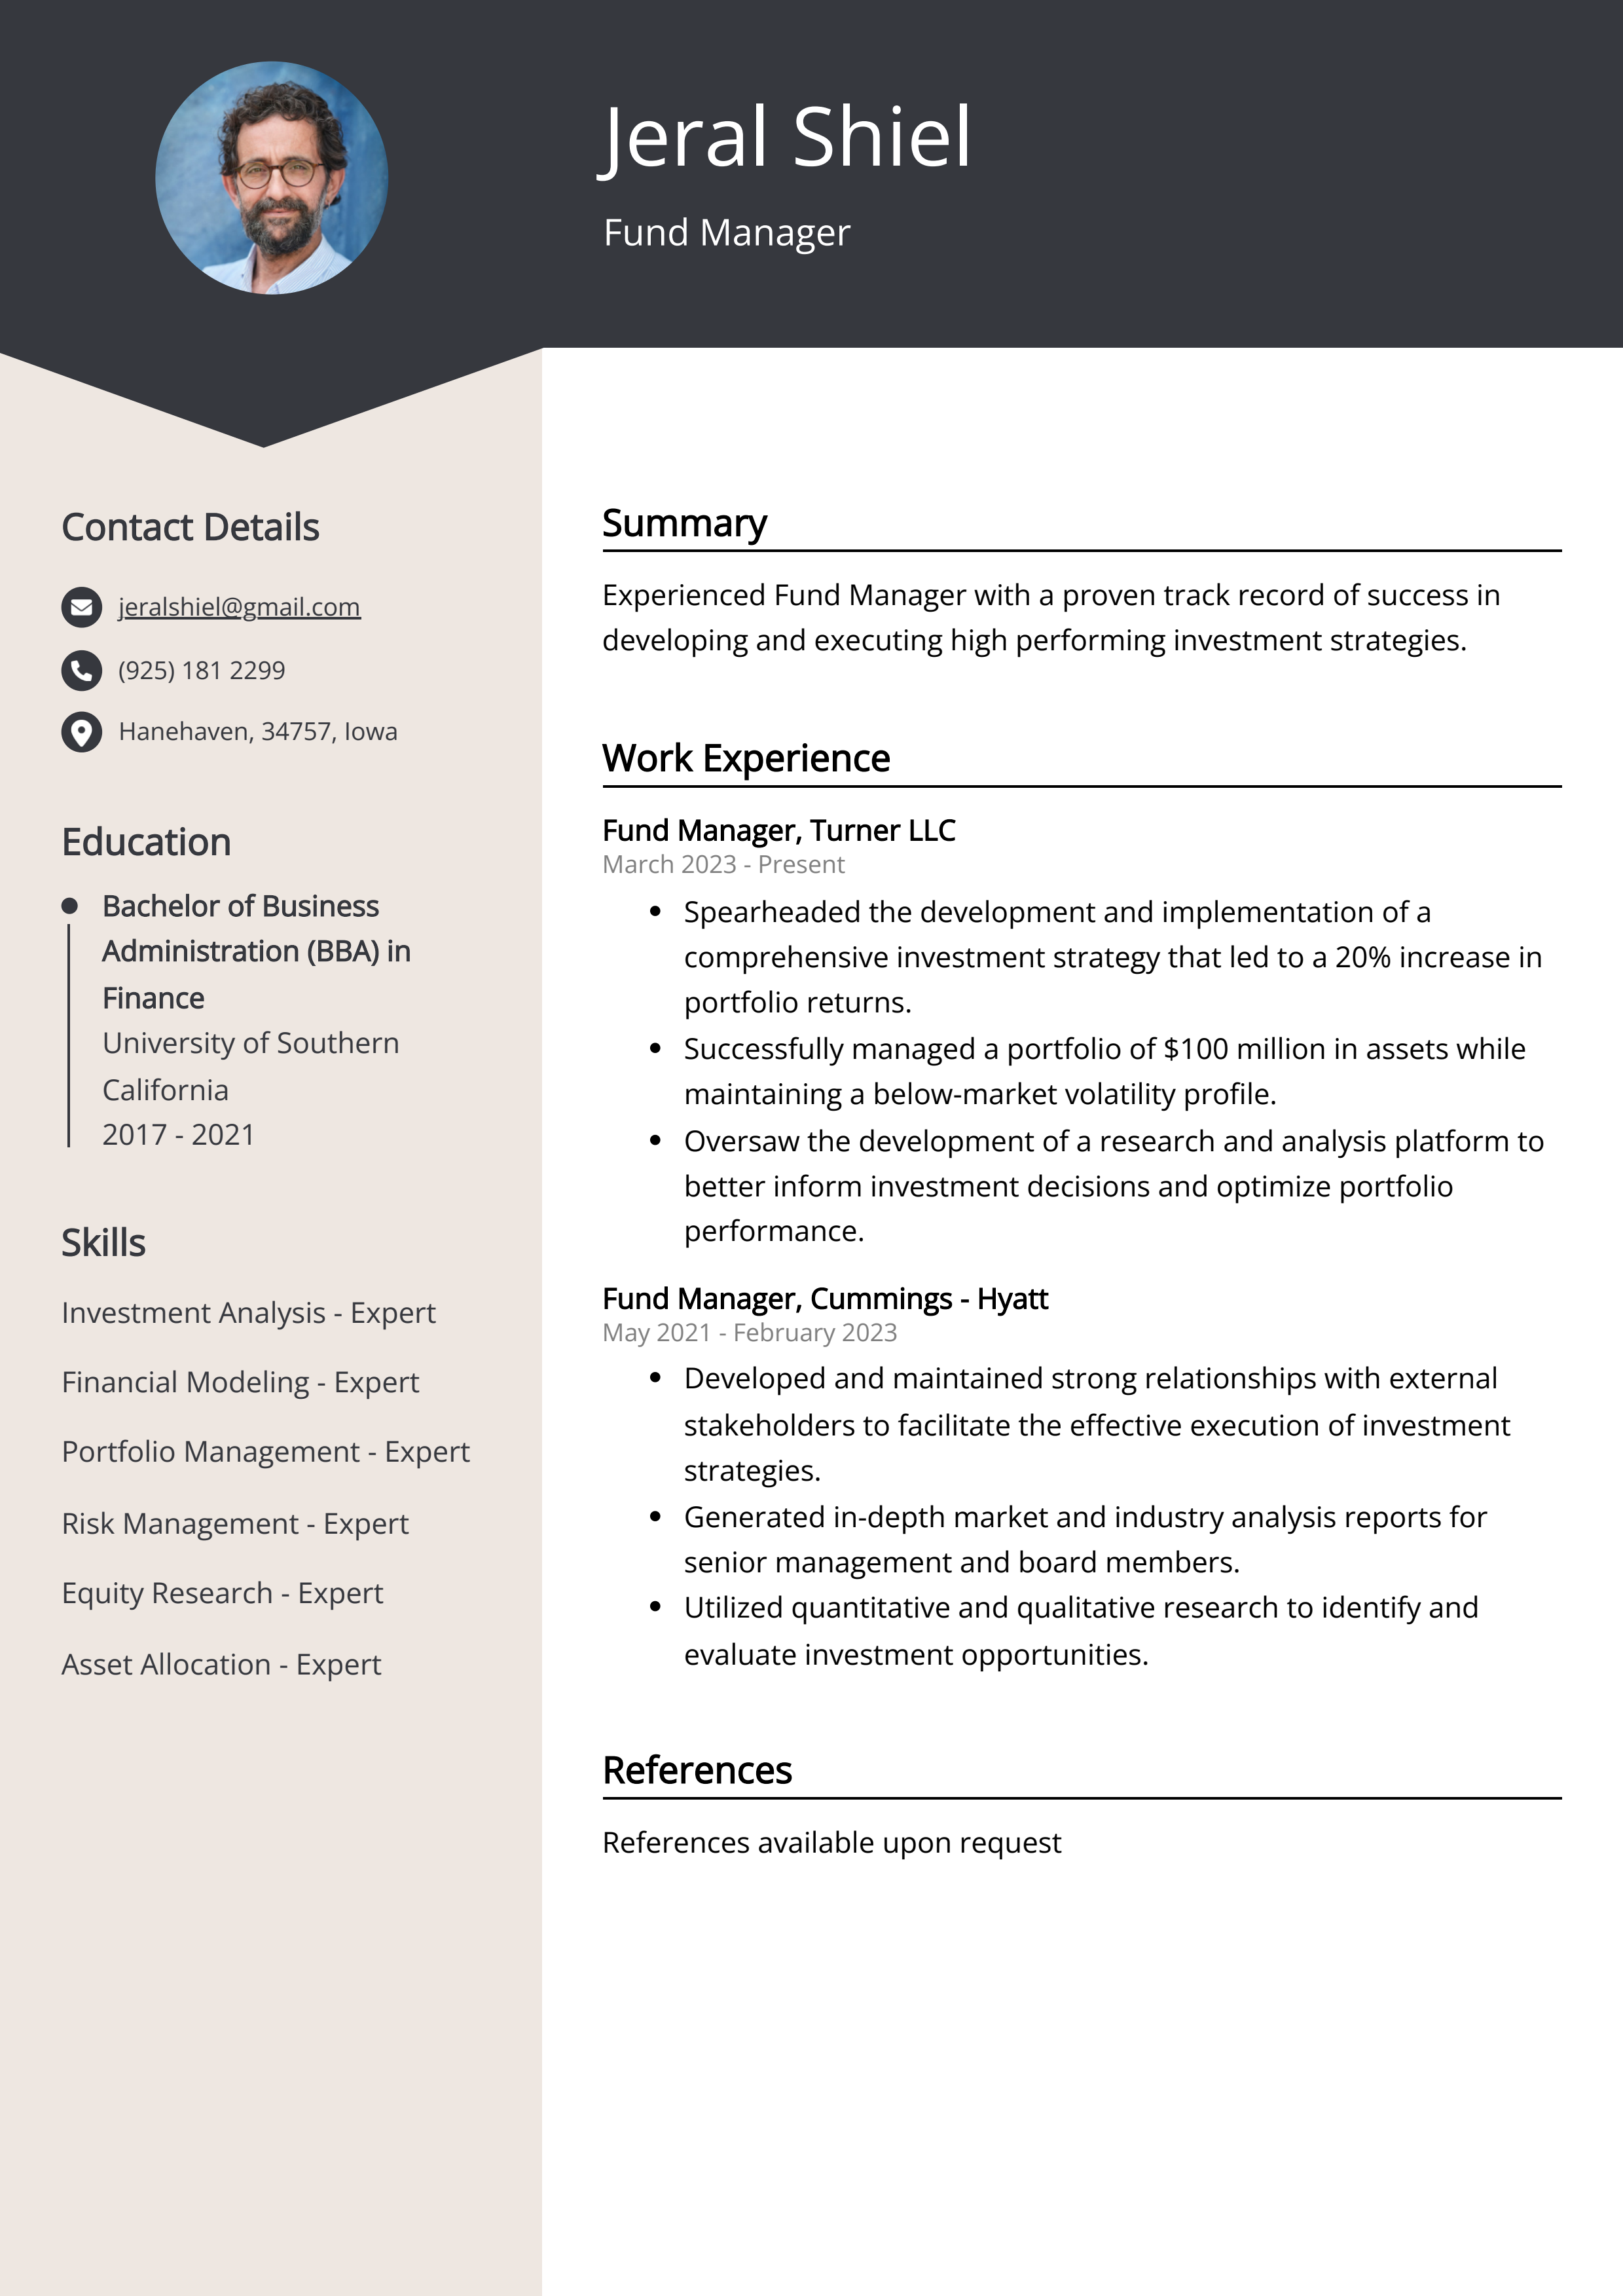 Fund Manager CV Example